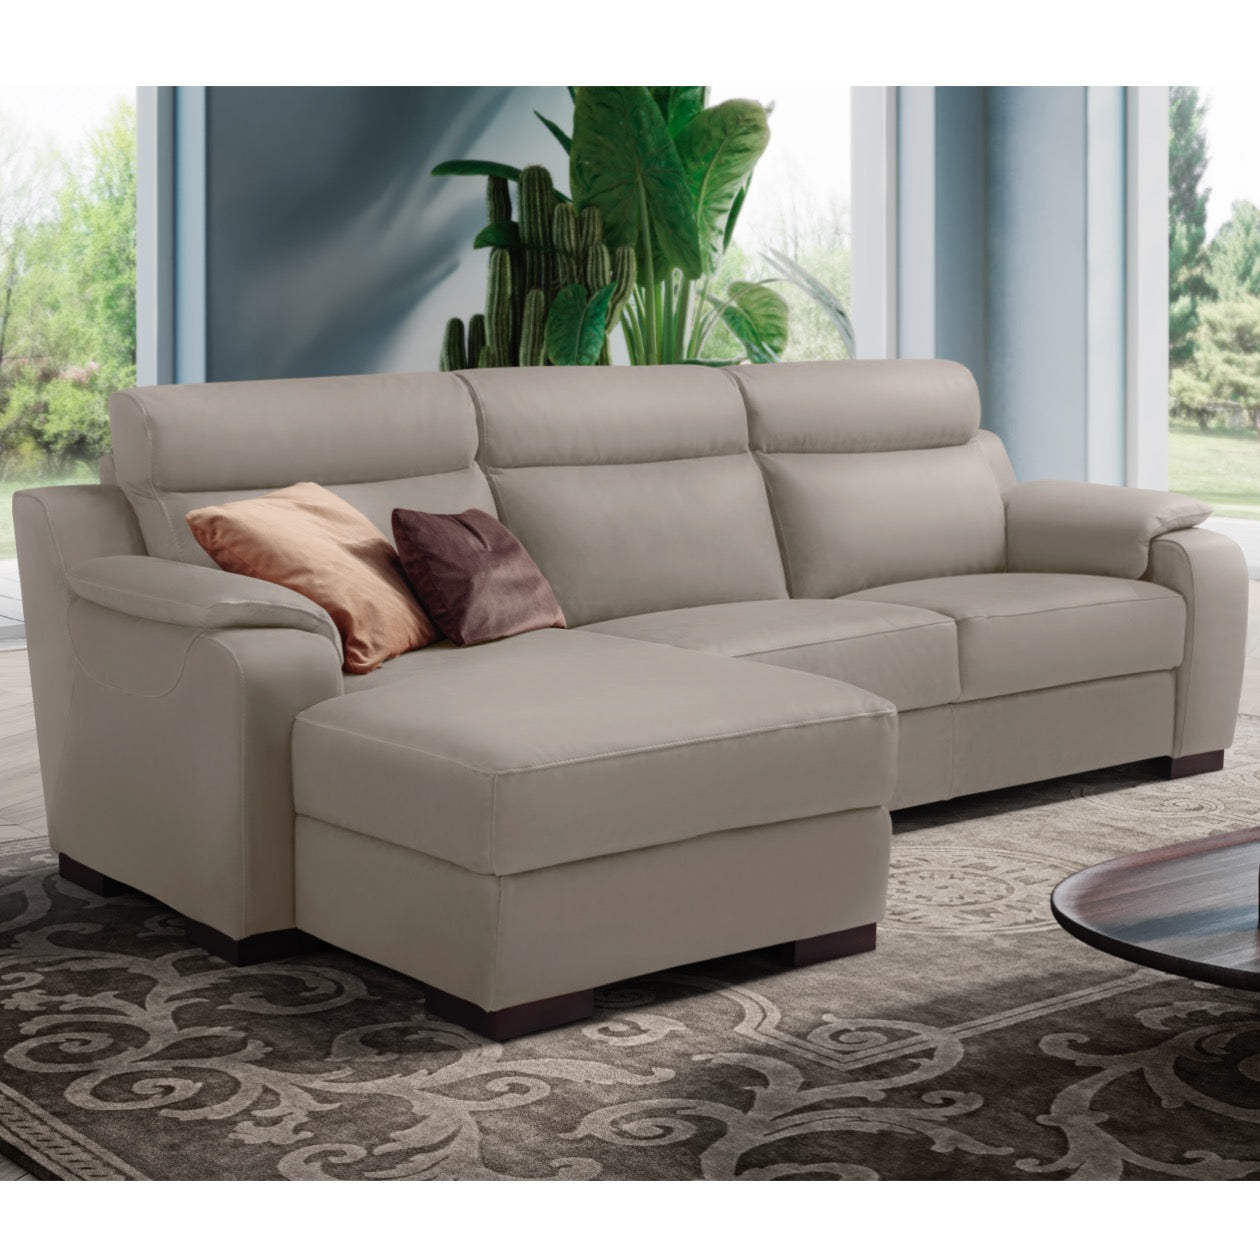 Ethos Left Hand Maxi Chaise Sofa Special Offer